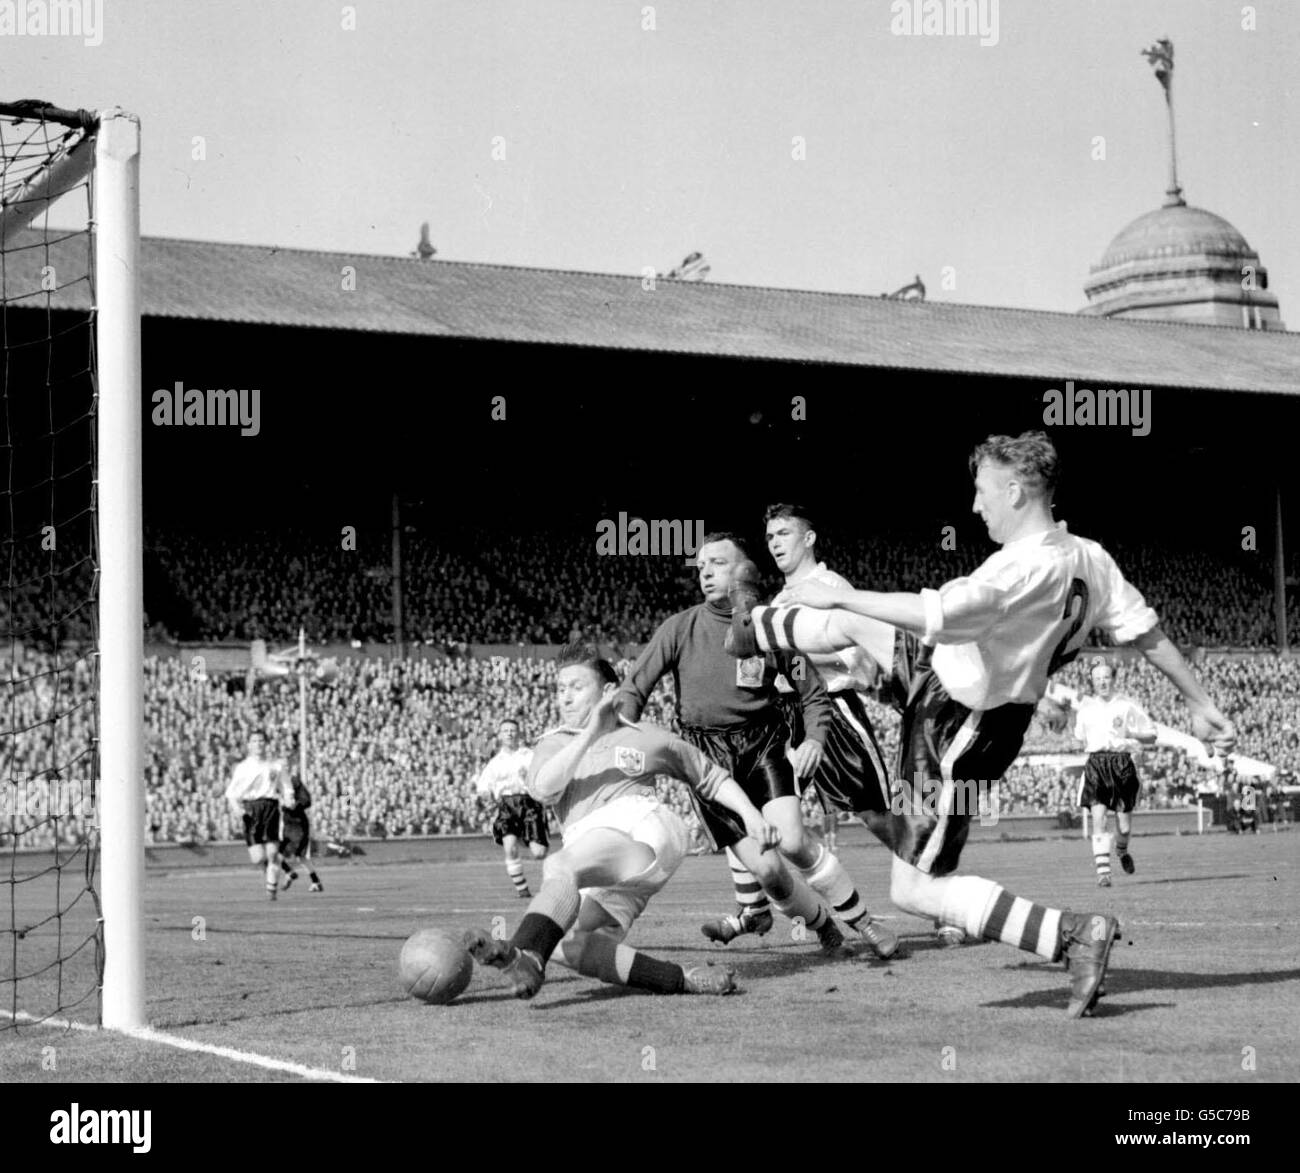 Blackpool footballer Stanley Mortenson (left) scores his team's second goal against Bolton Wanderers, during their 1953 FA Cup Final football match at Wembley Stadium, in London. Blackpool won 4-3. * L-R: goalkeeper S Hanson; centre-half M Barrass, and right-back J Ball (No 2). Stock Photo